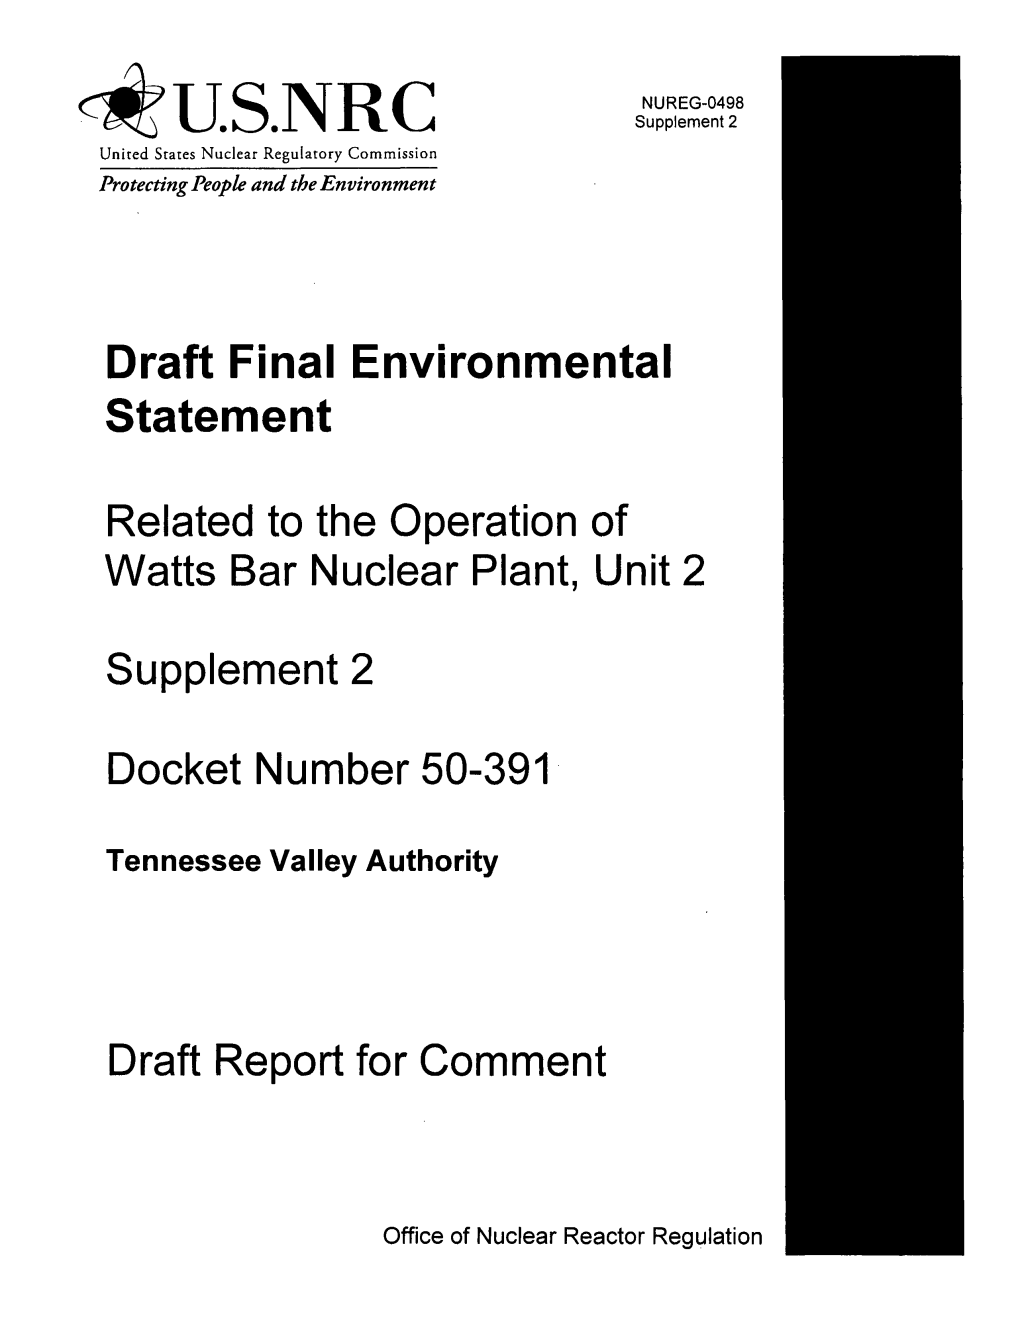 Draft Final Environmental Statement, Related to the Operation of Watts